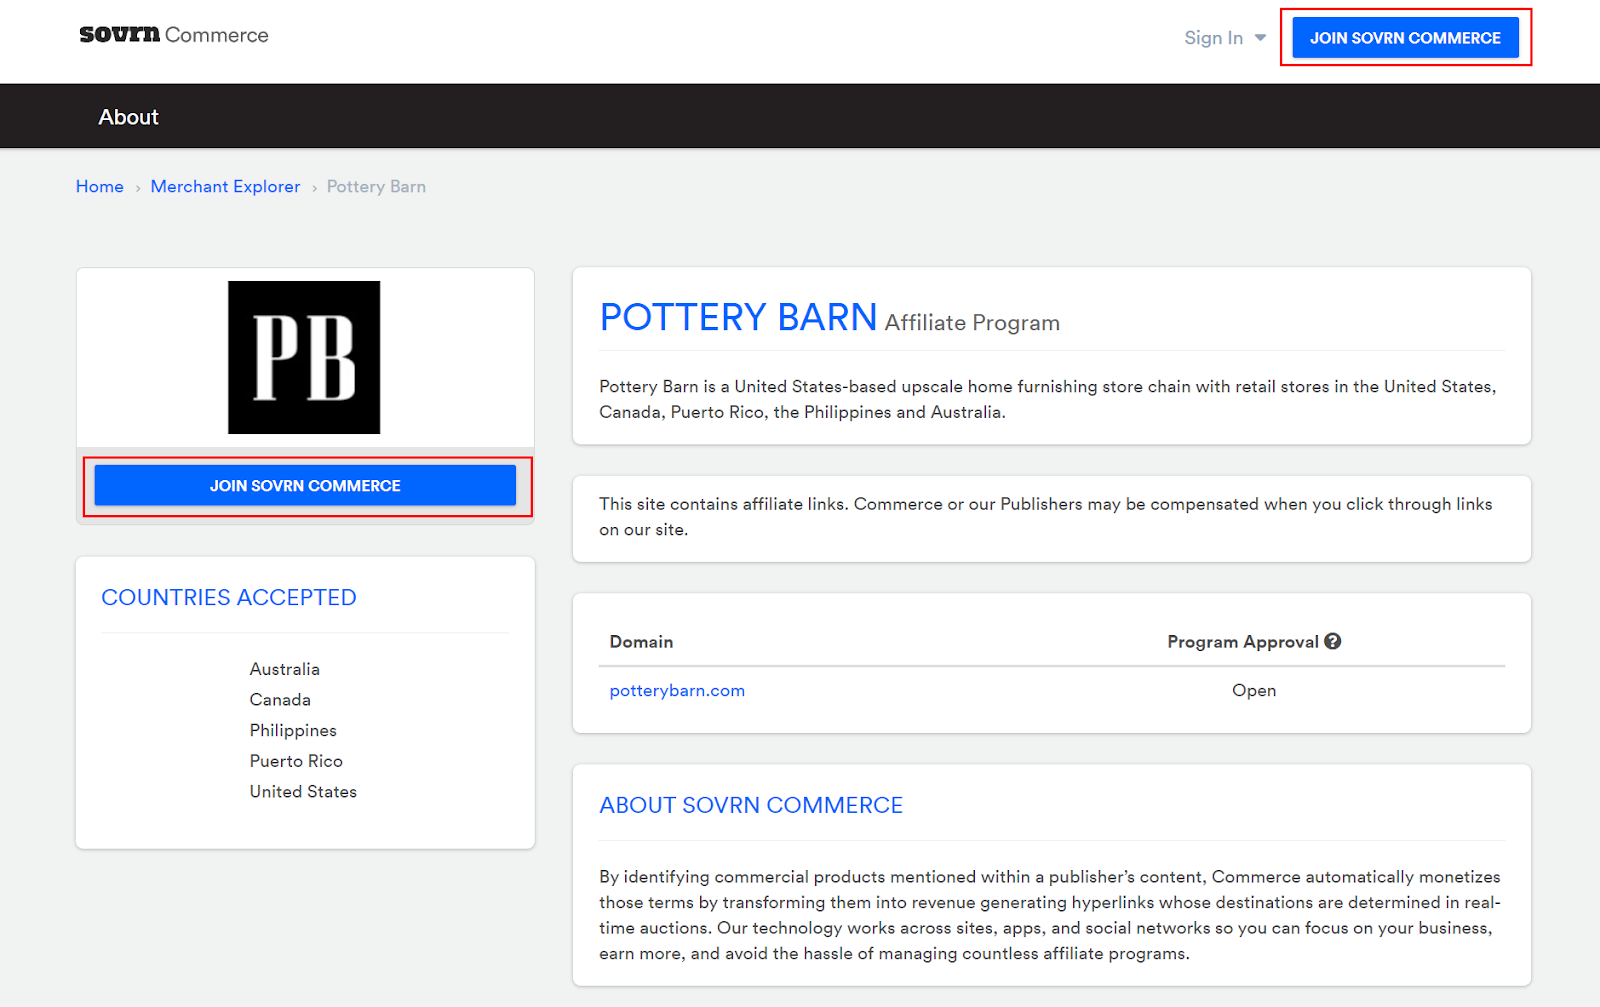 Page for joining Pottery barn affiliate program on Sovrn Commerce